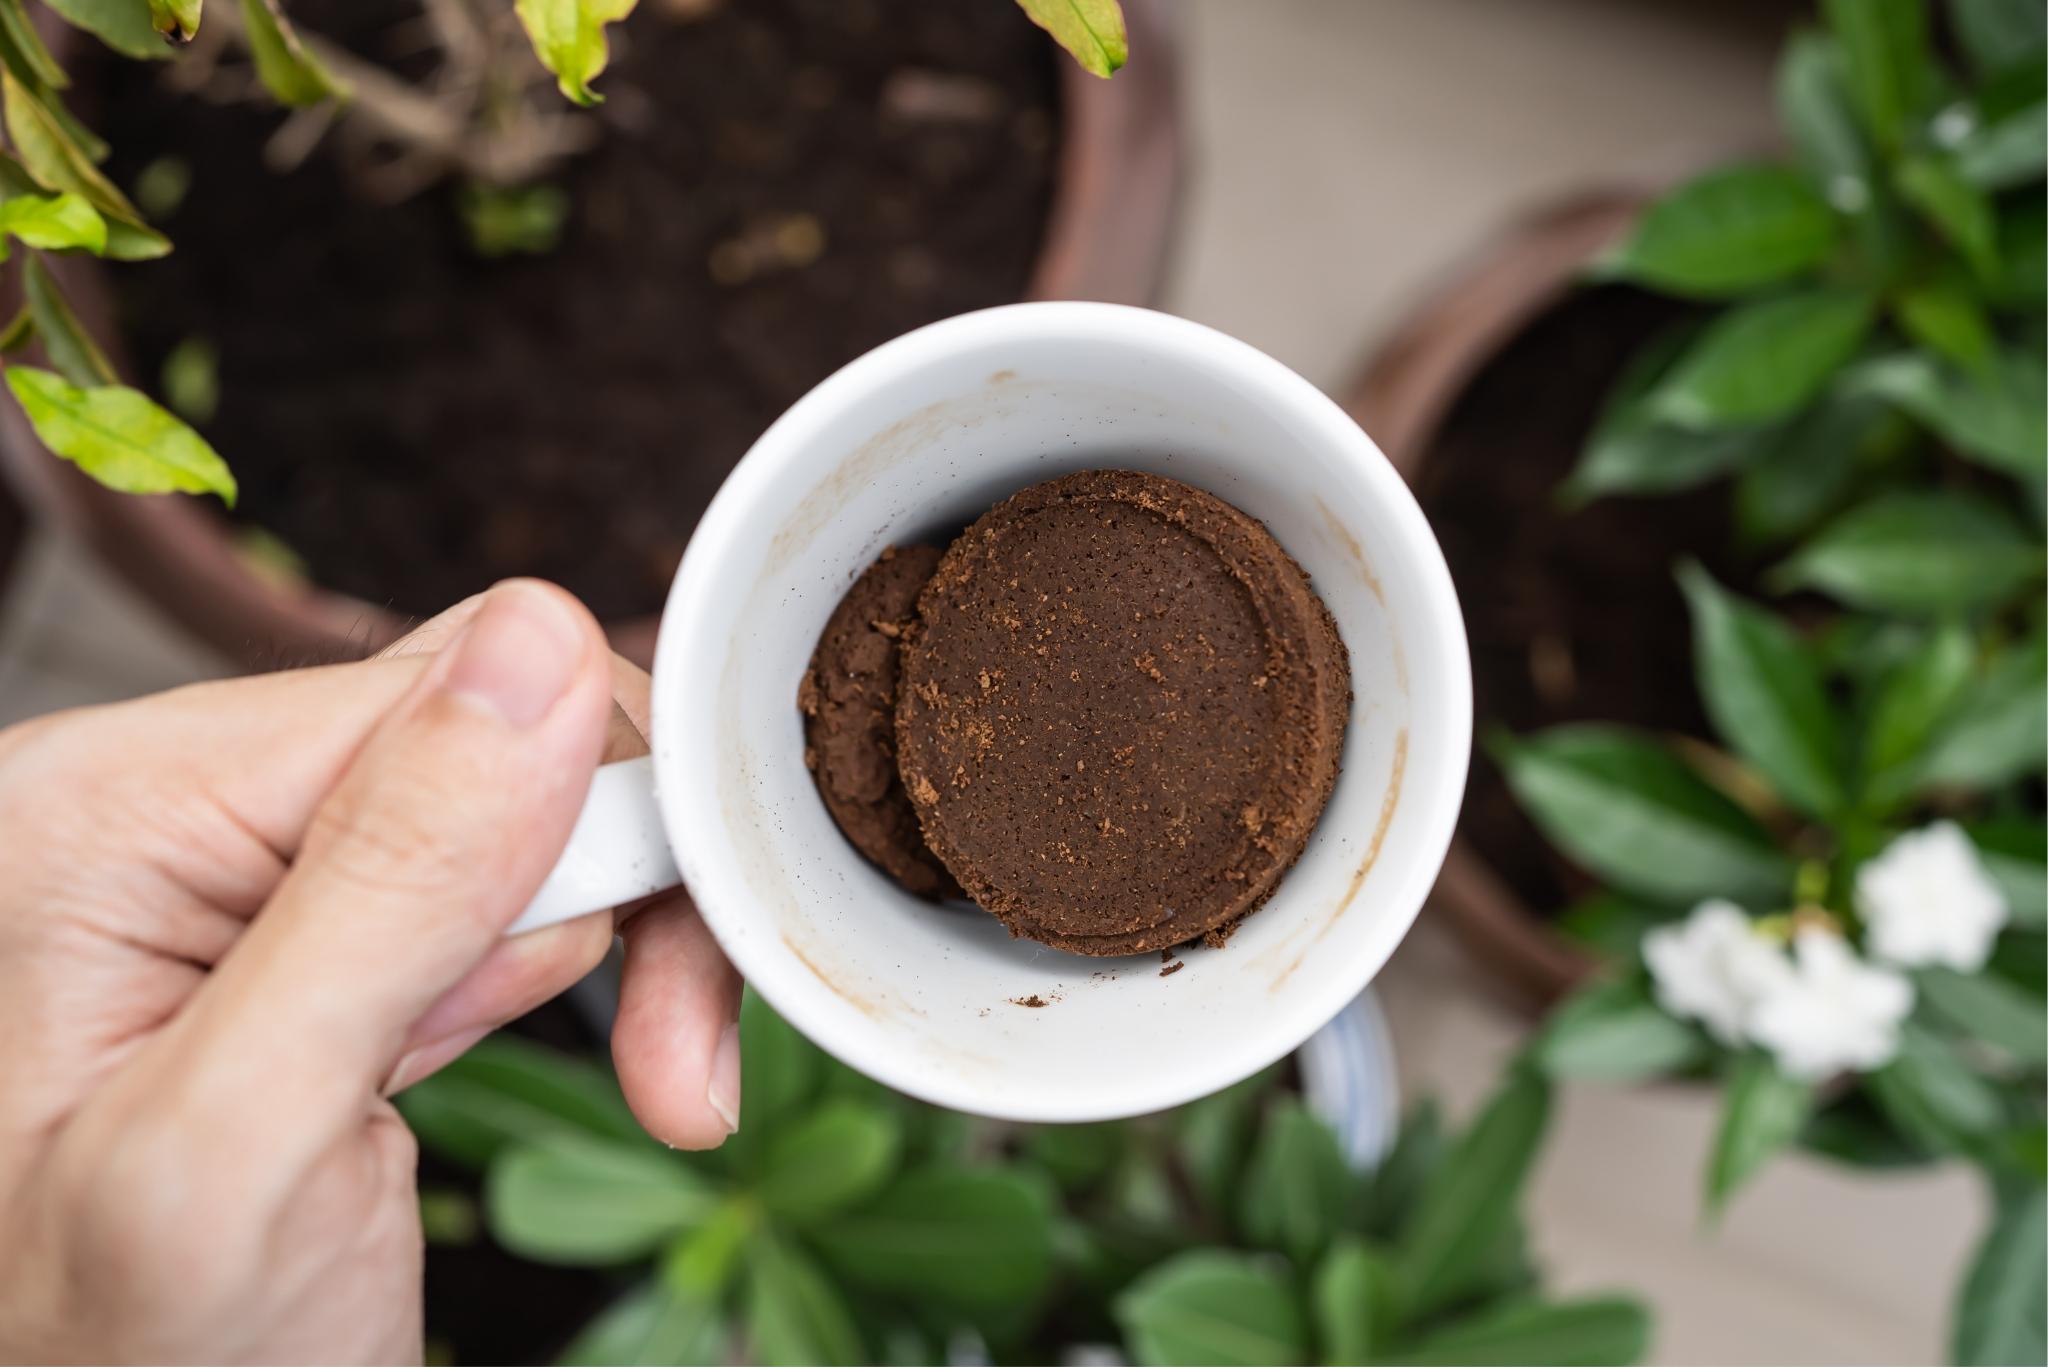 Guide to Using Coffee Grounds in the Garden